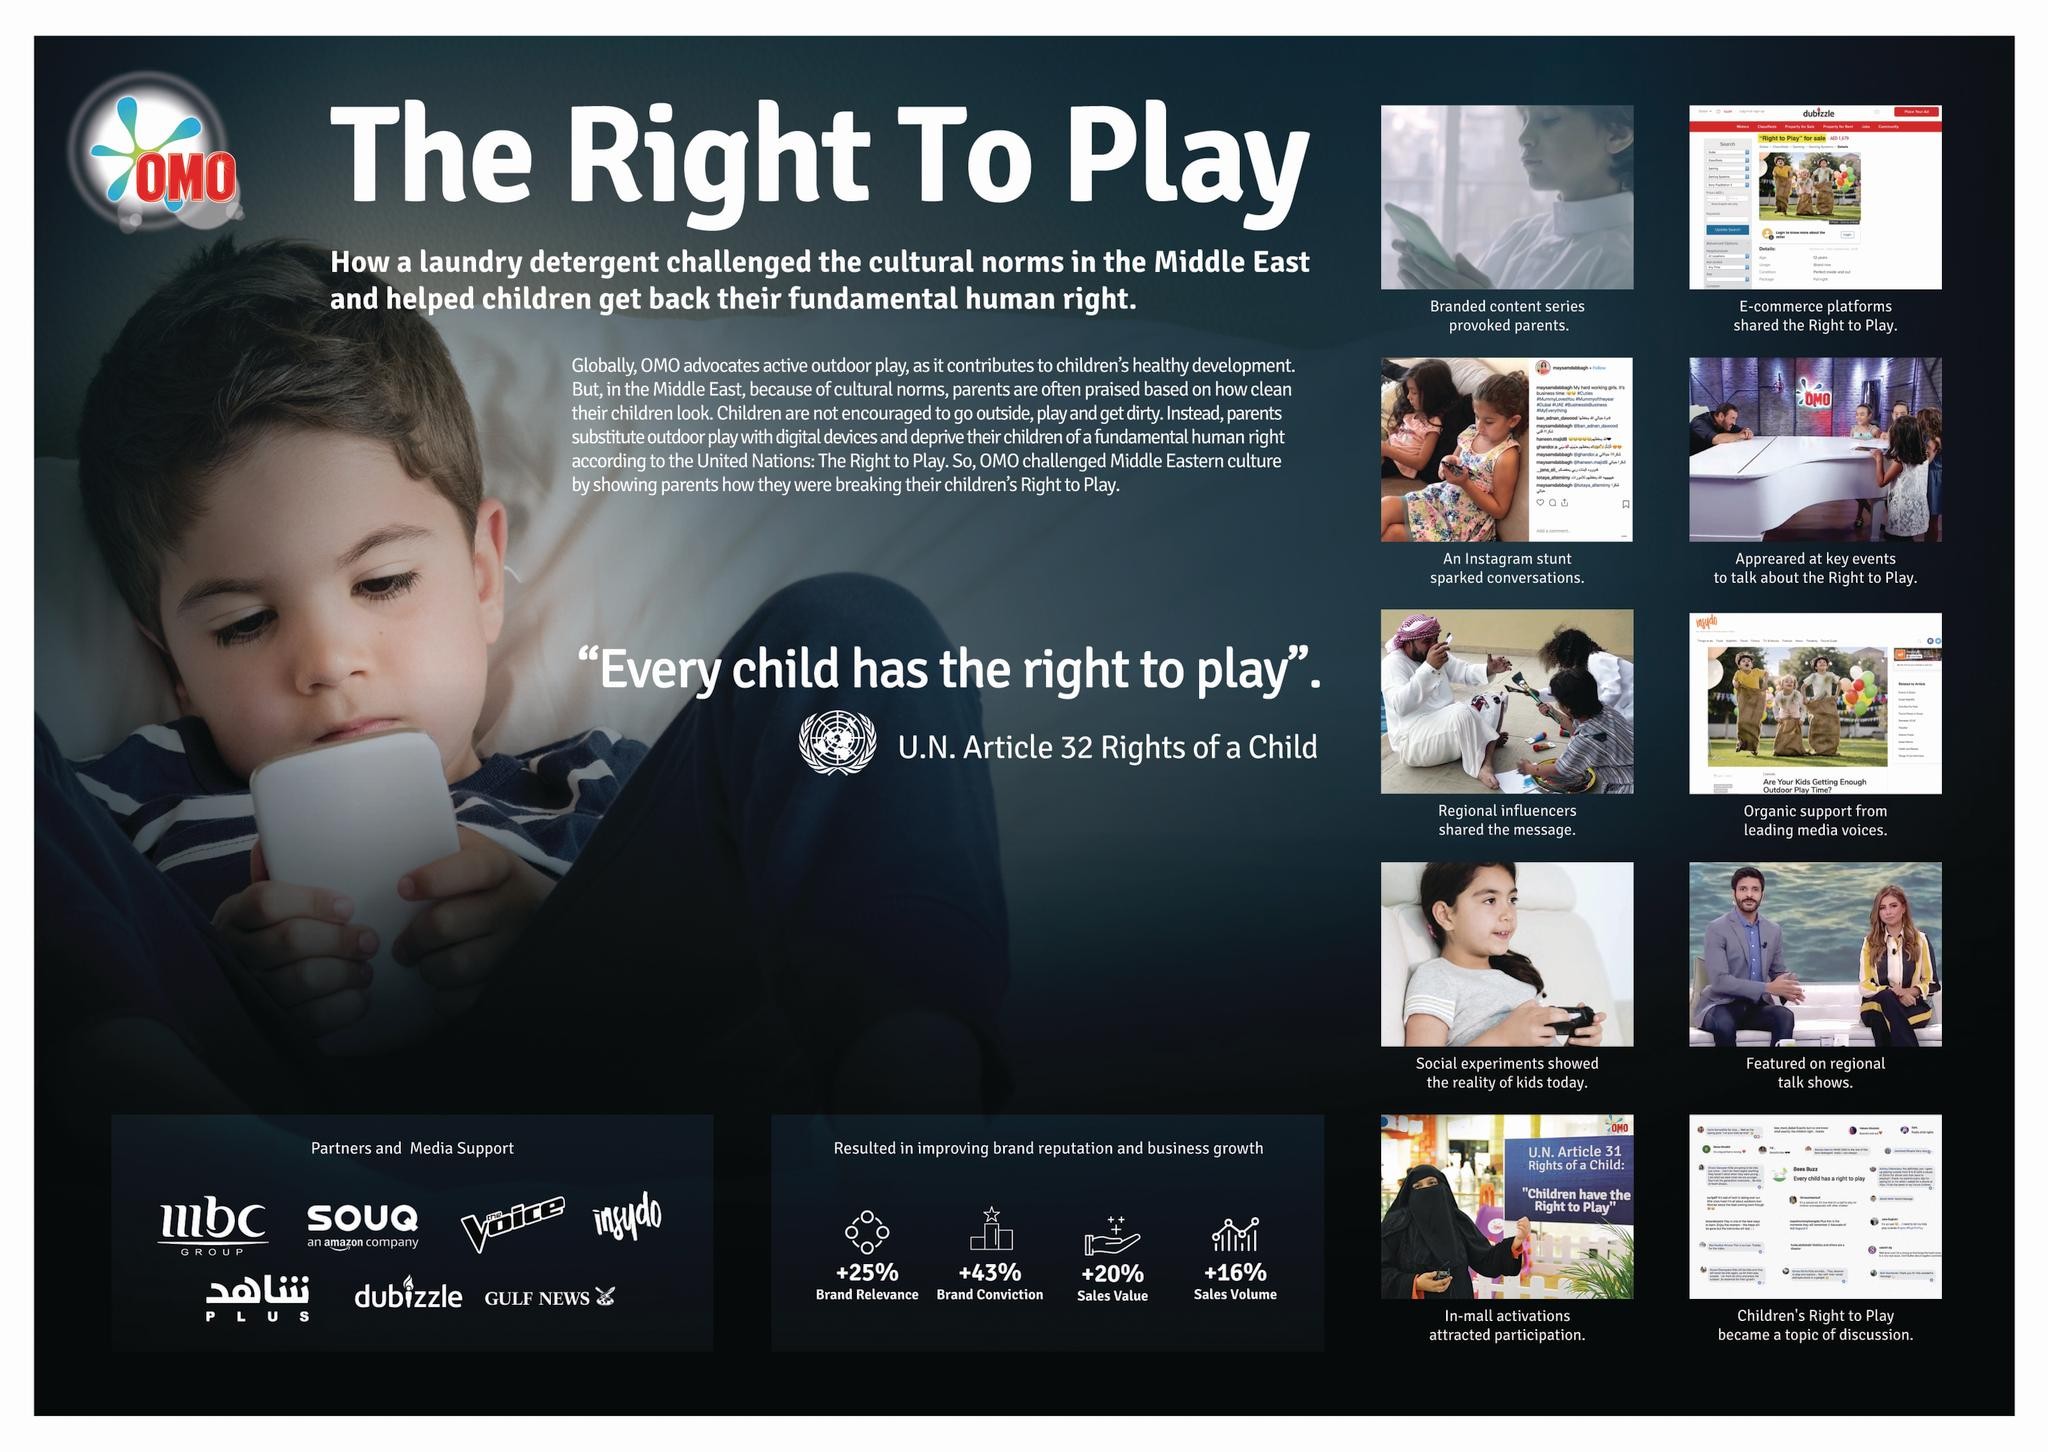 The Right to Play